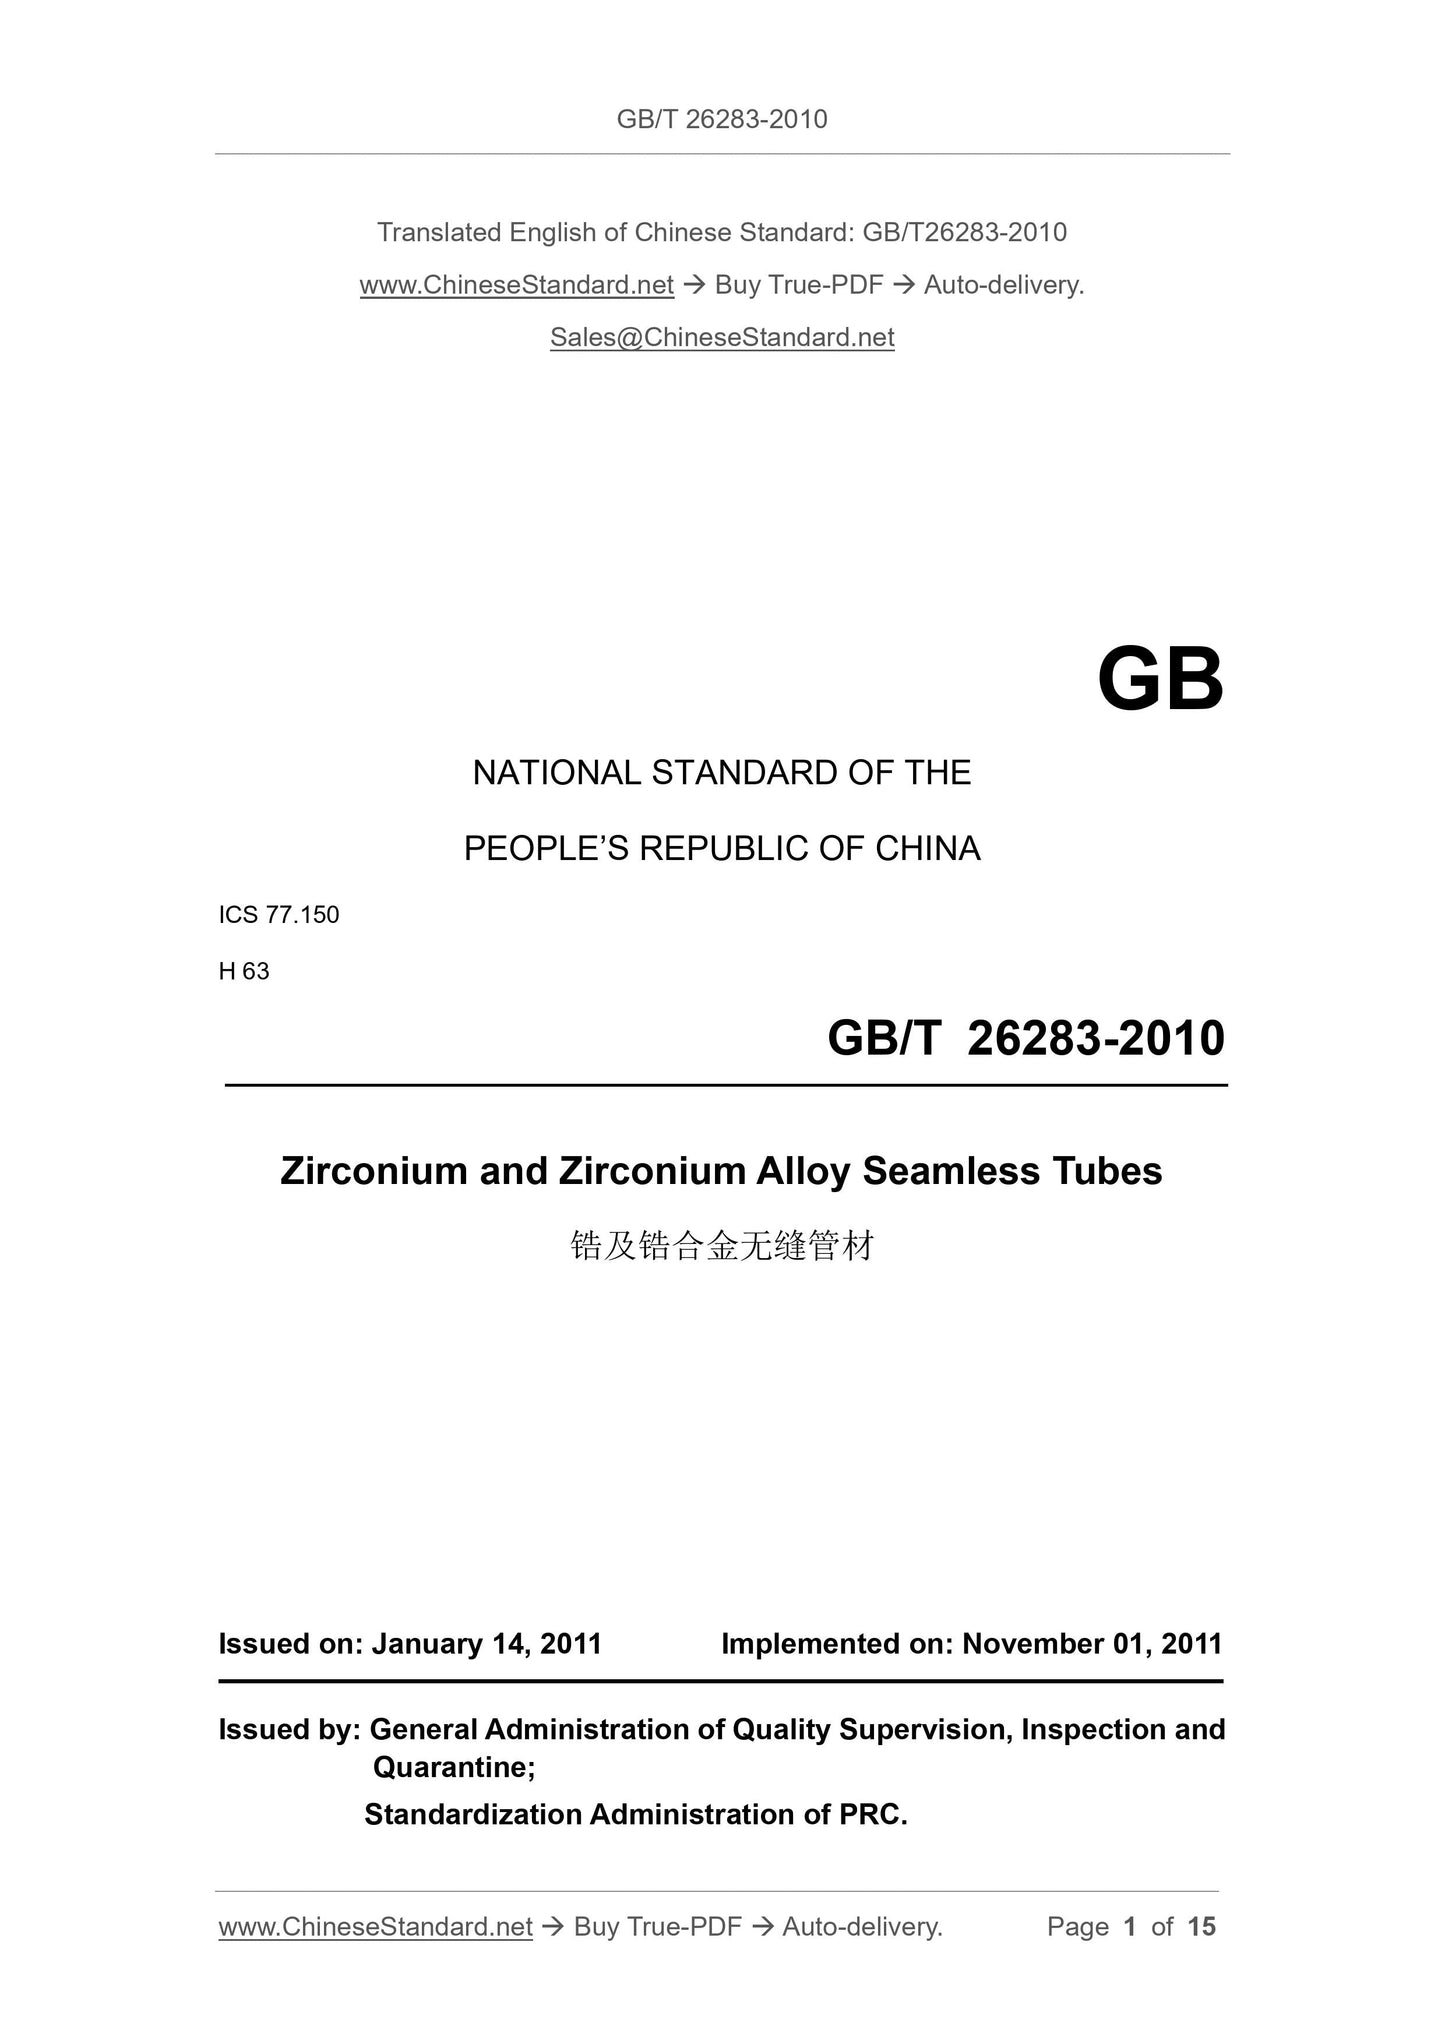 GB/T 26283-2010 Page 1